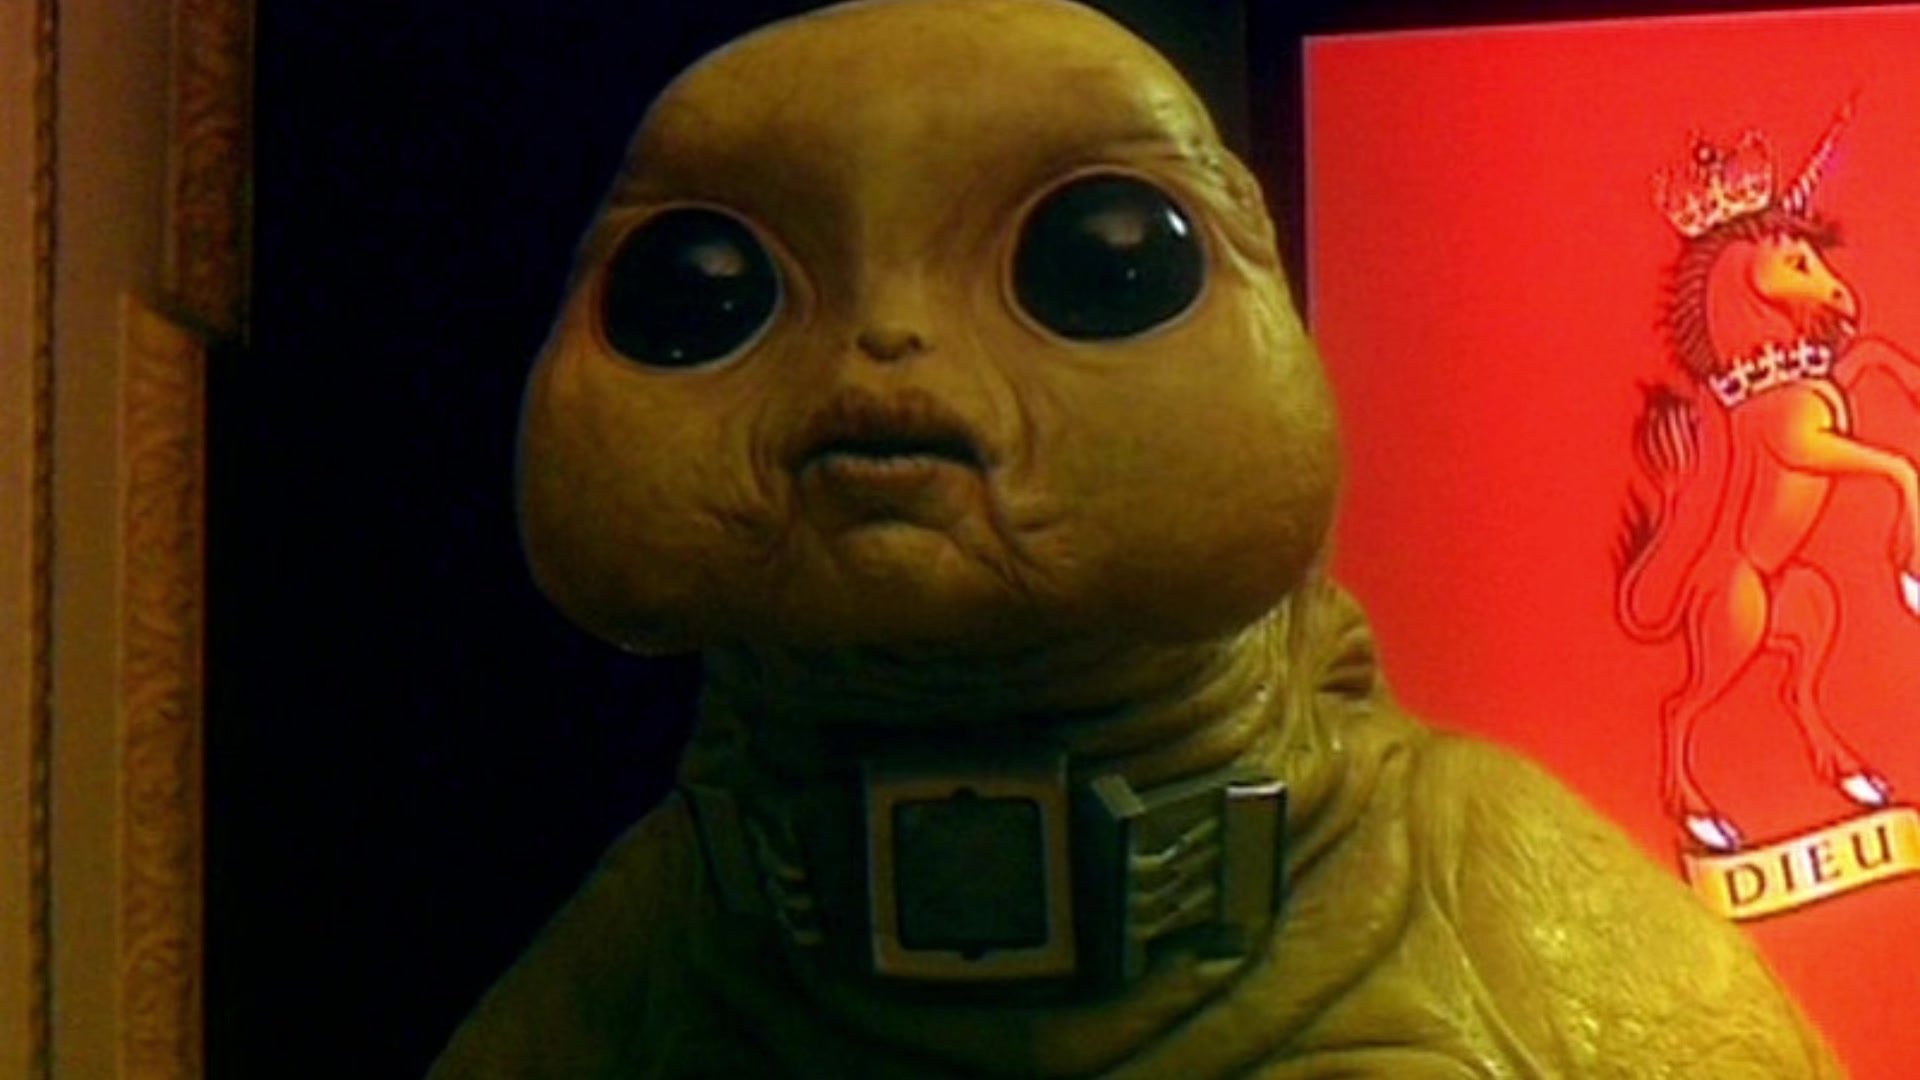 Doctor who: slitheen farts